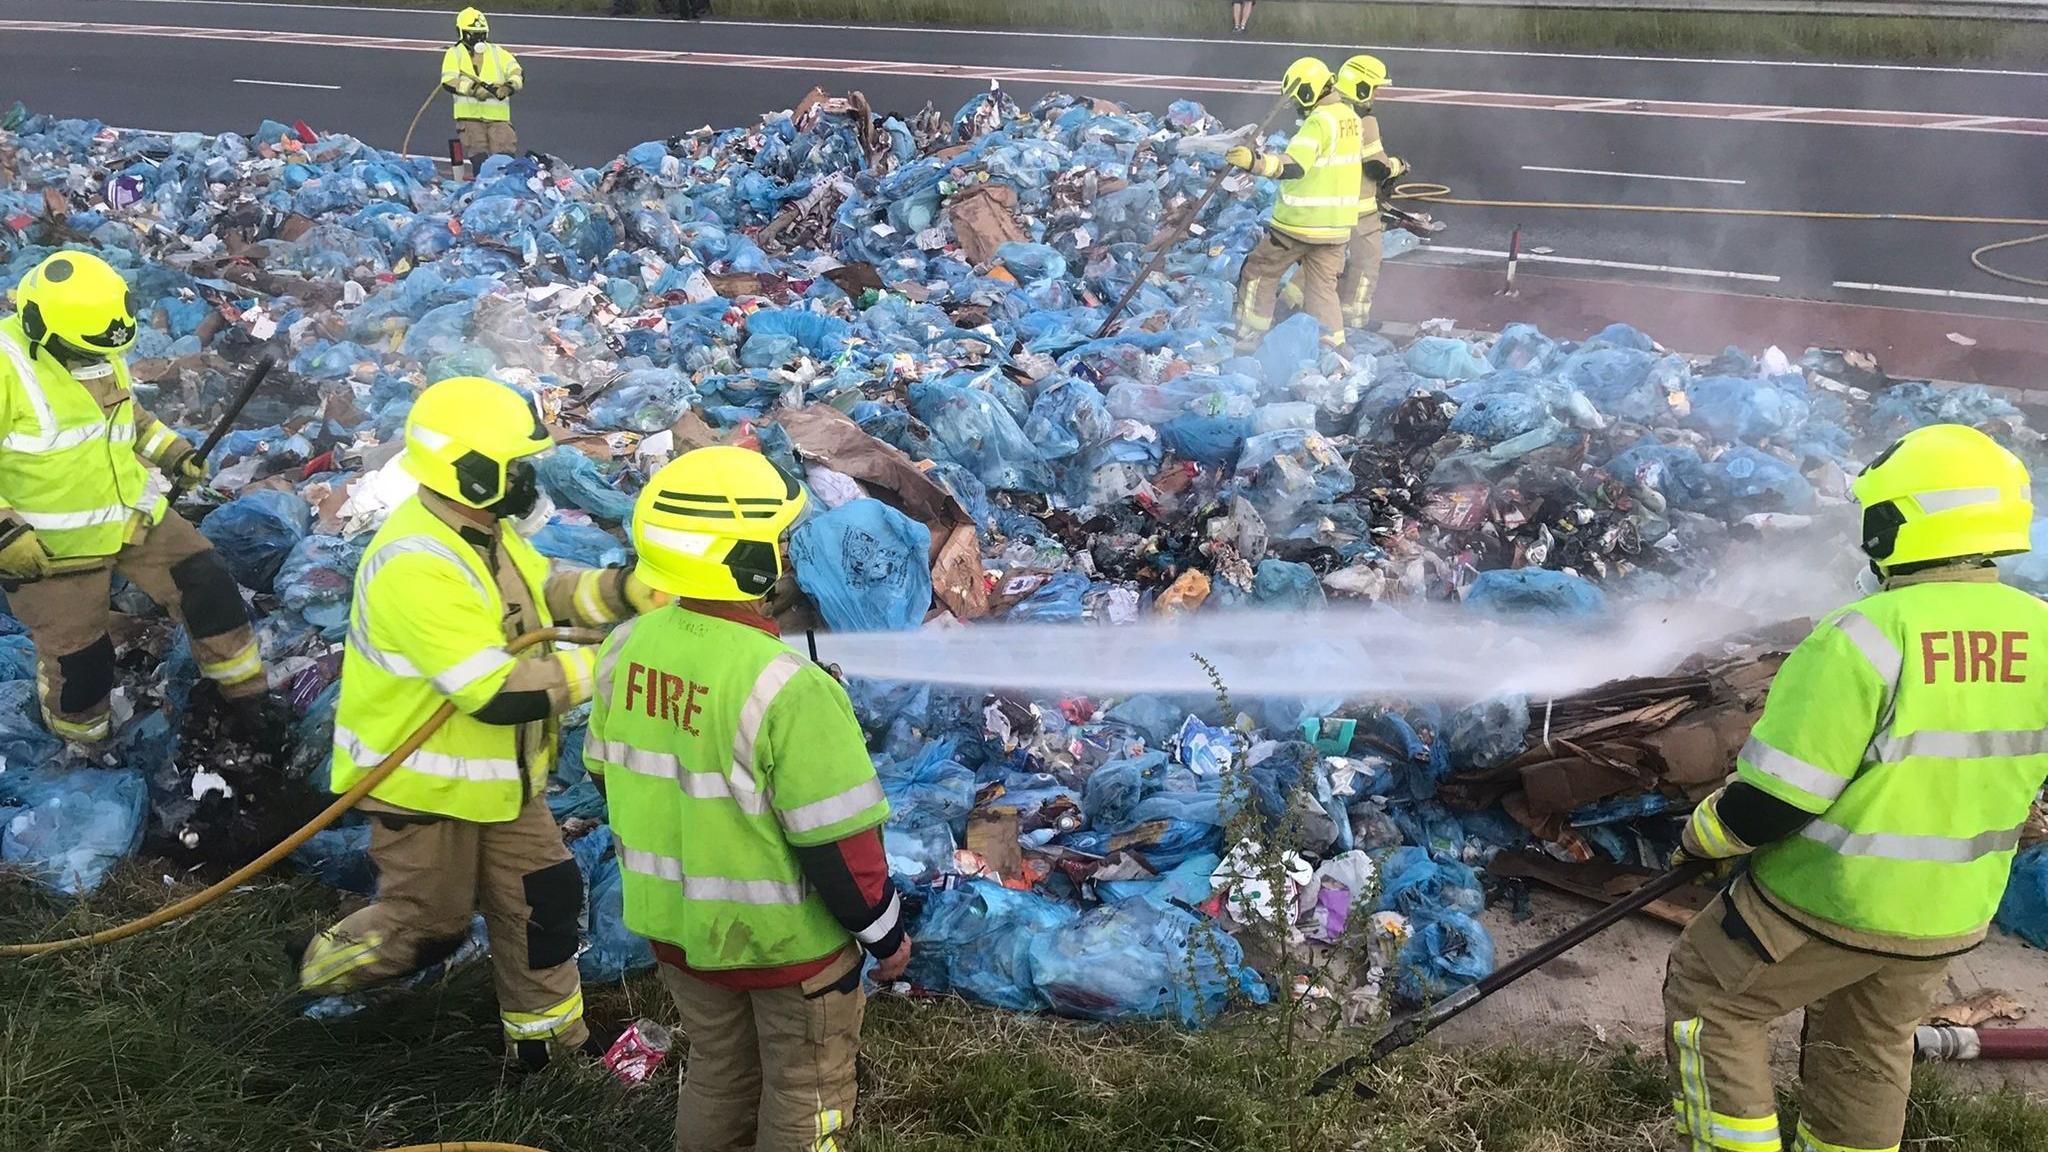 Firefighters emptied the rubbish onto the road to make sure it was out